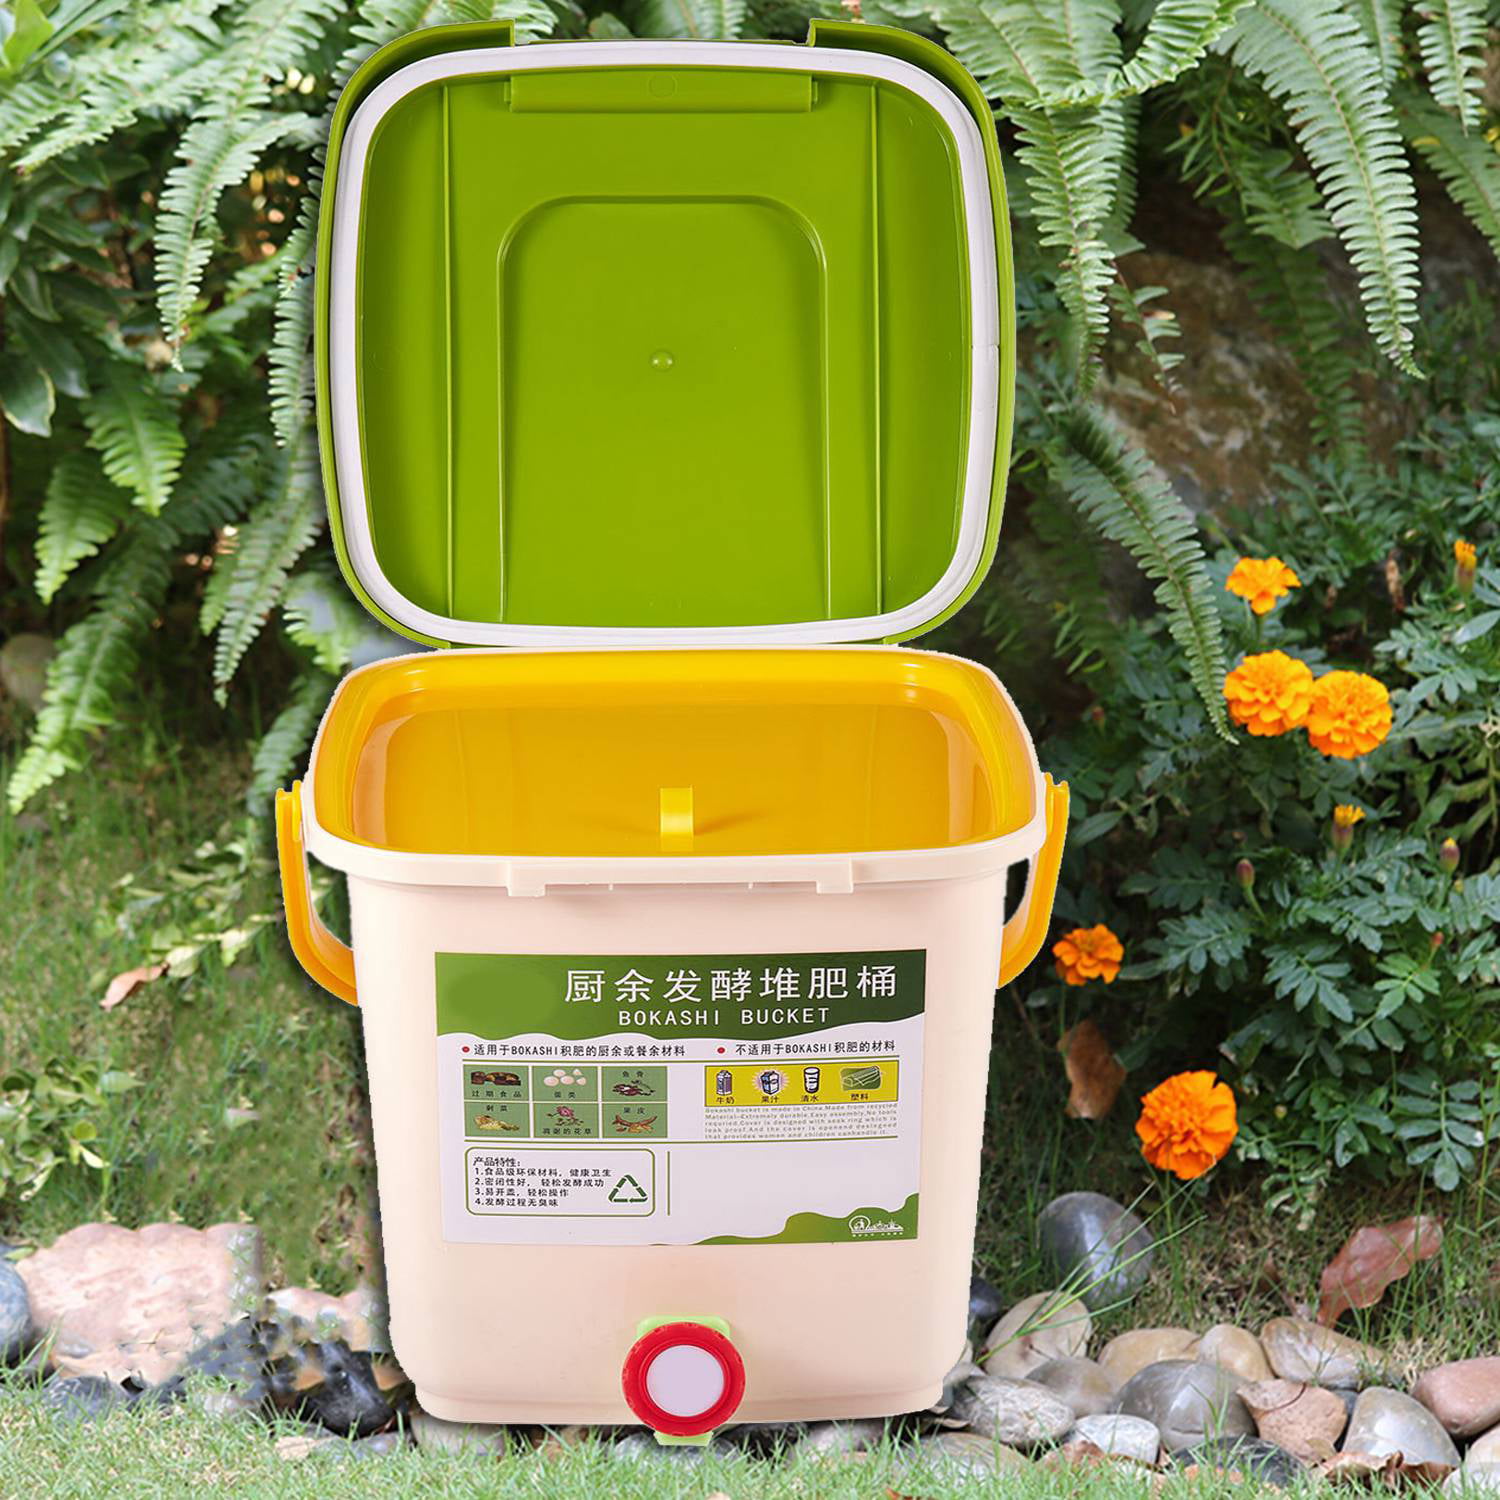 1X 12L Compost Bin Recycle Composter Aerated Compost Bin PP Organic Homema X5K1 